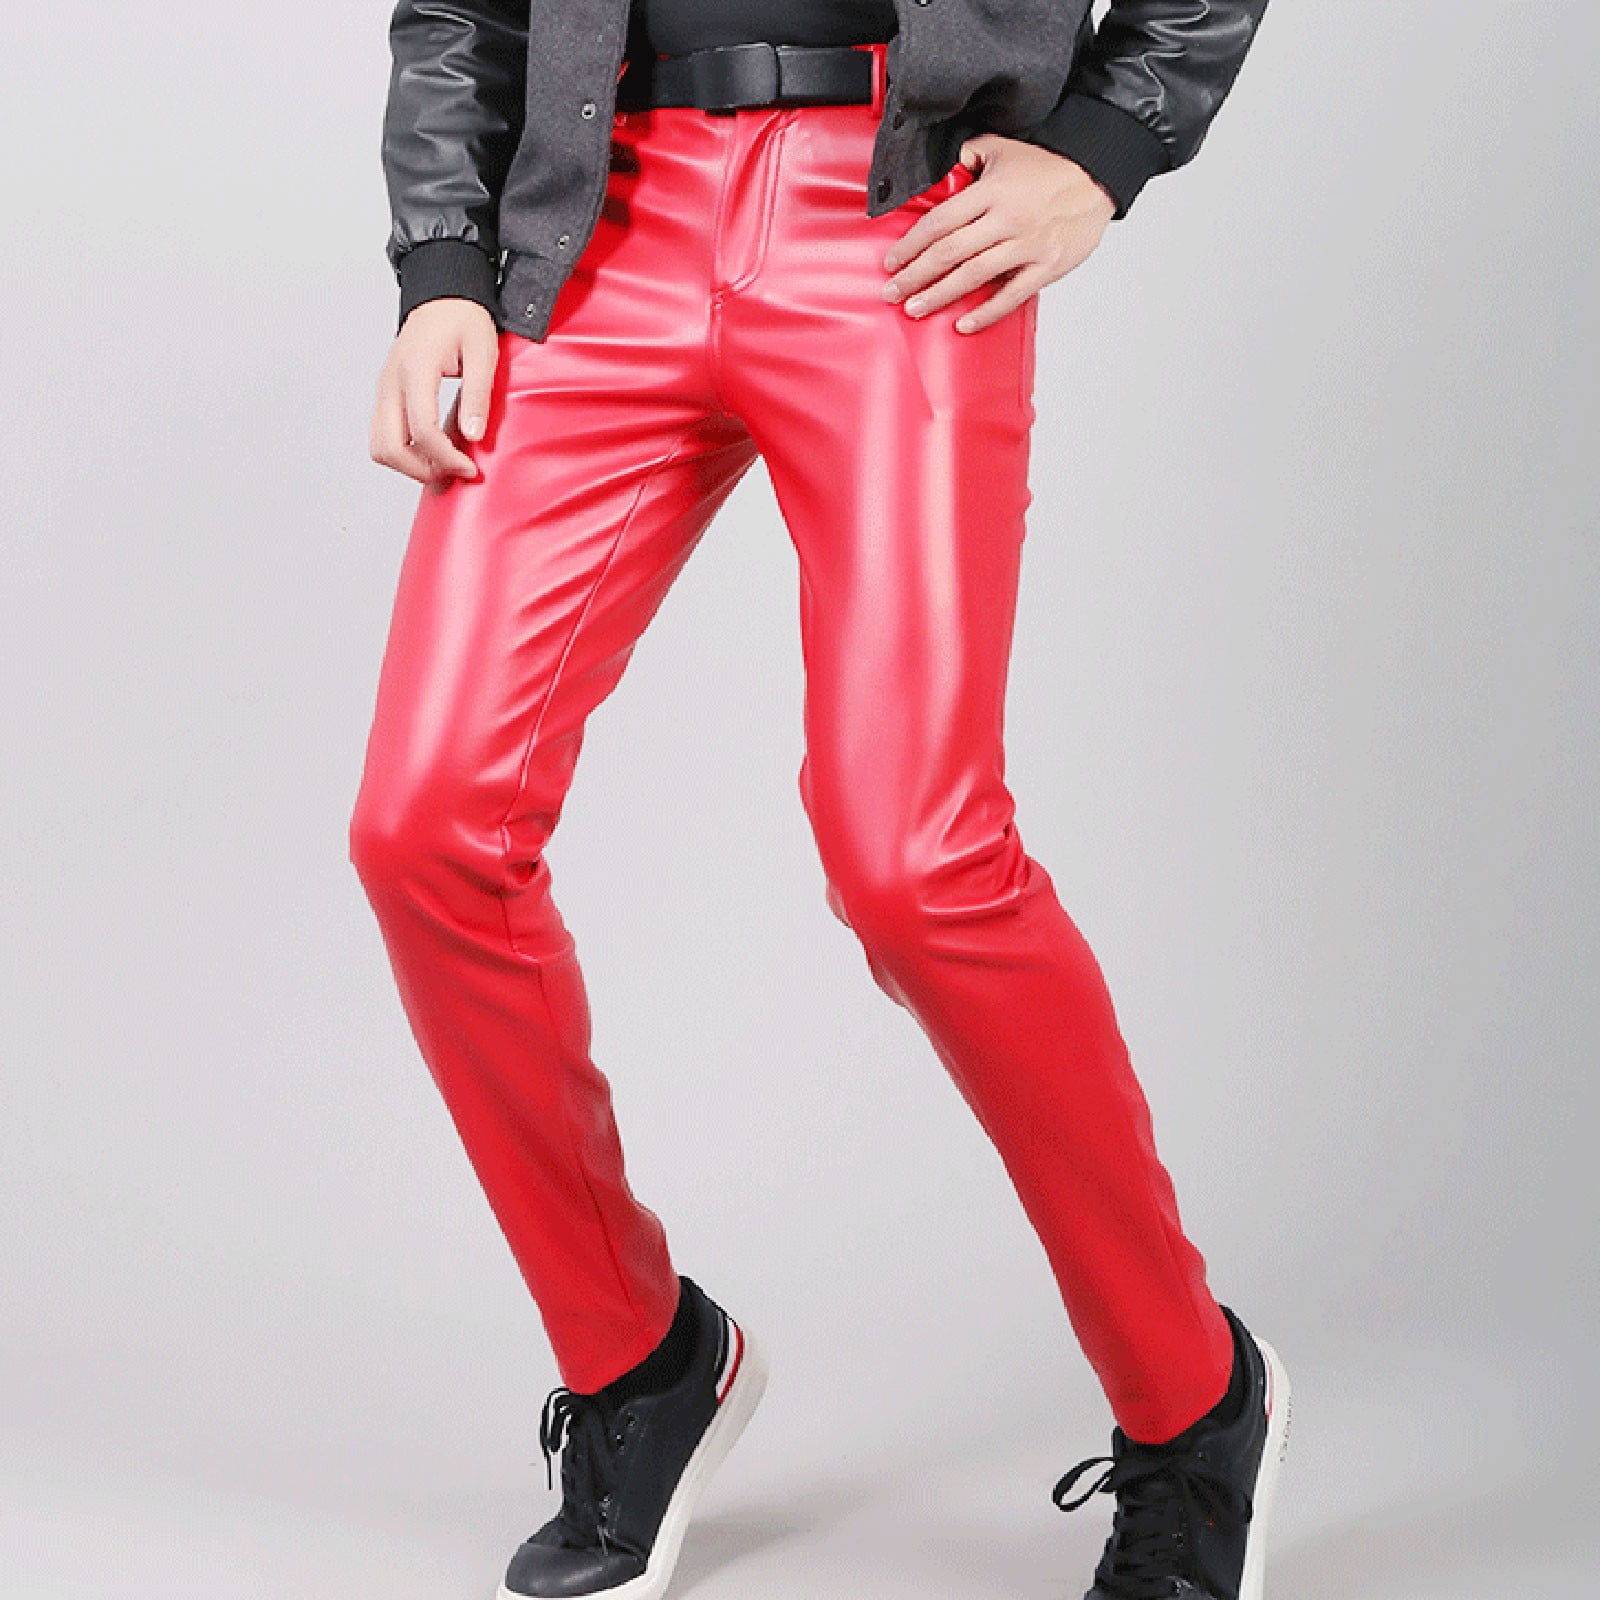 Lace Up Leather Pants - Lace Up Leather Leggings | Buy Now